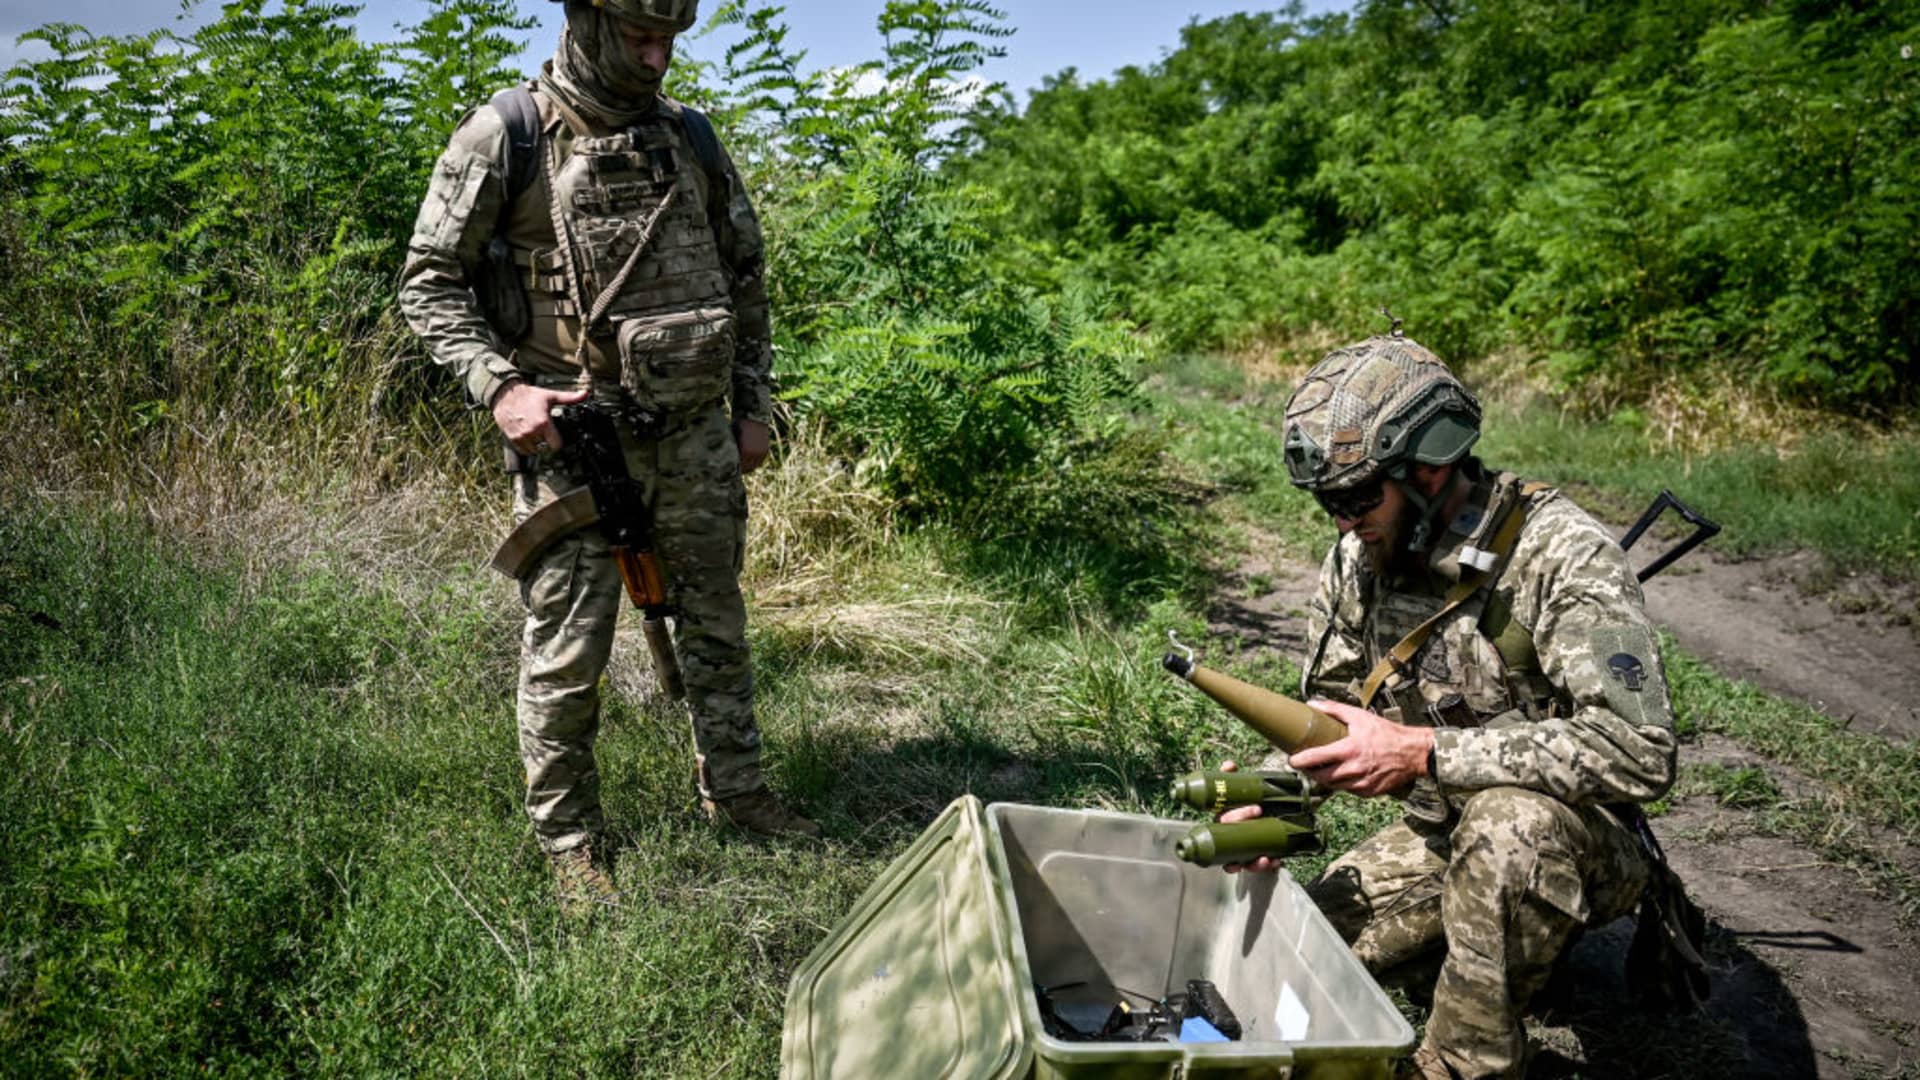 Servicemen of the Vykhor Dnipro unit of the 108th Separate Brigade of the Territorial Defence Forces of the Armed Forces of Ukraine on a combat mission in the Zaporizhzhia direction, southeastern Ukraine, on August 4, 2023. The unit operates unmanned combat aerial vehicles.